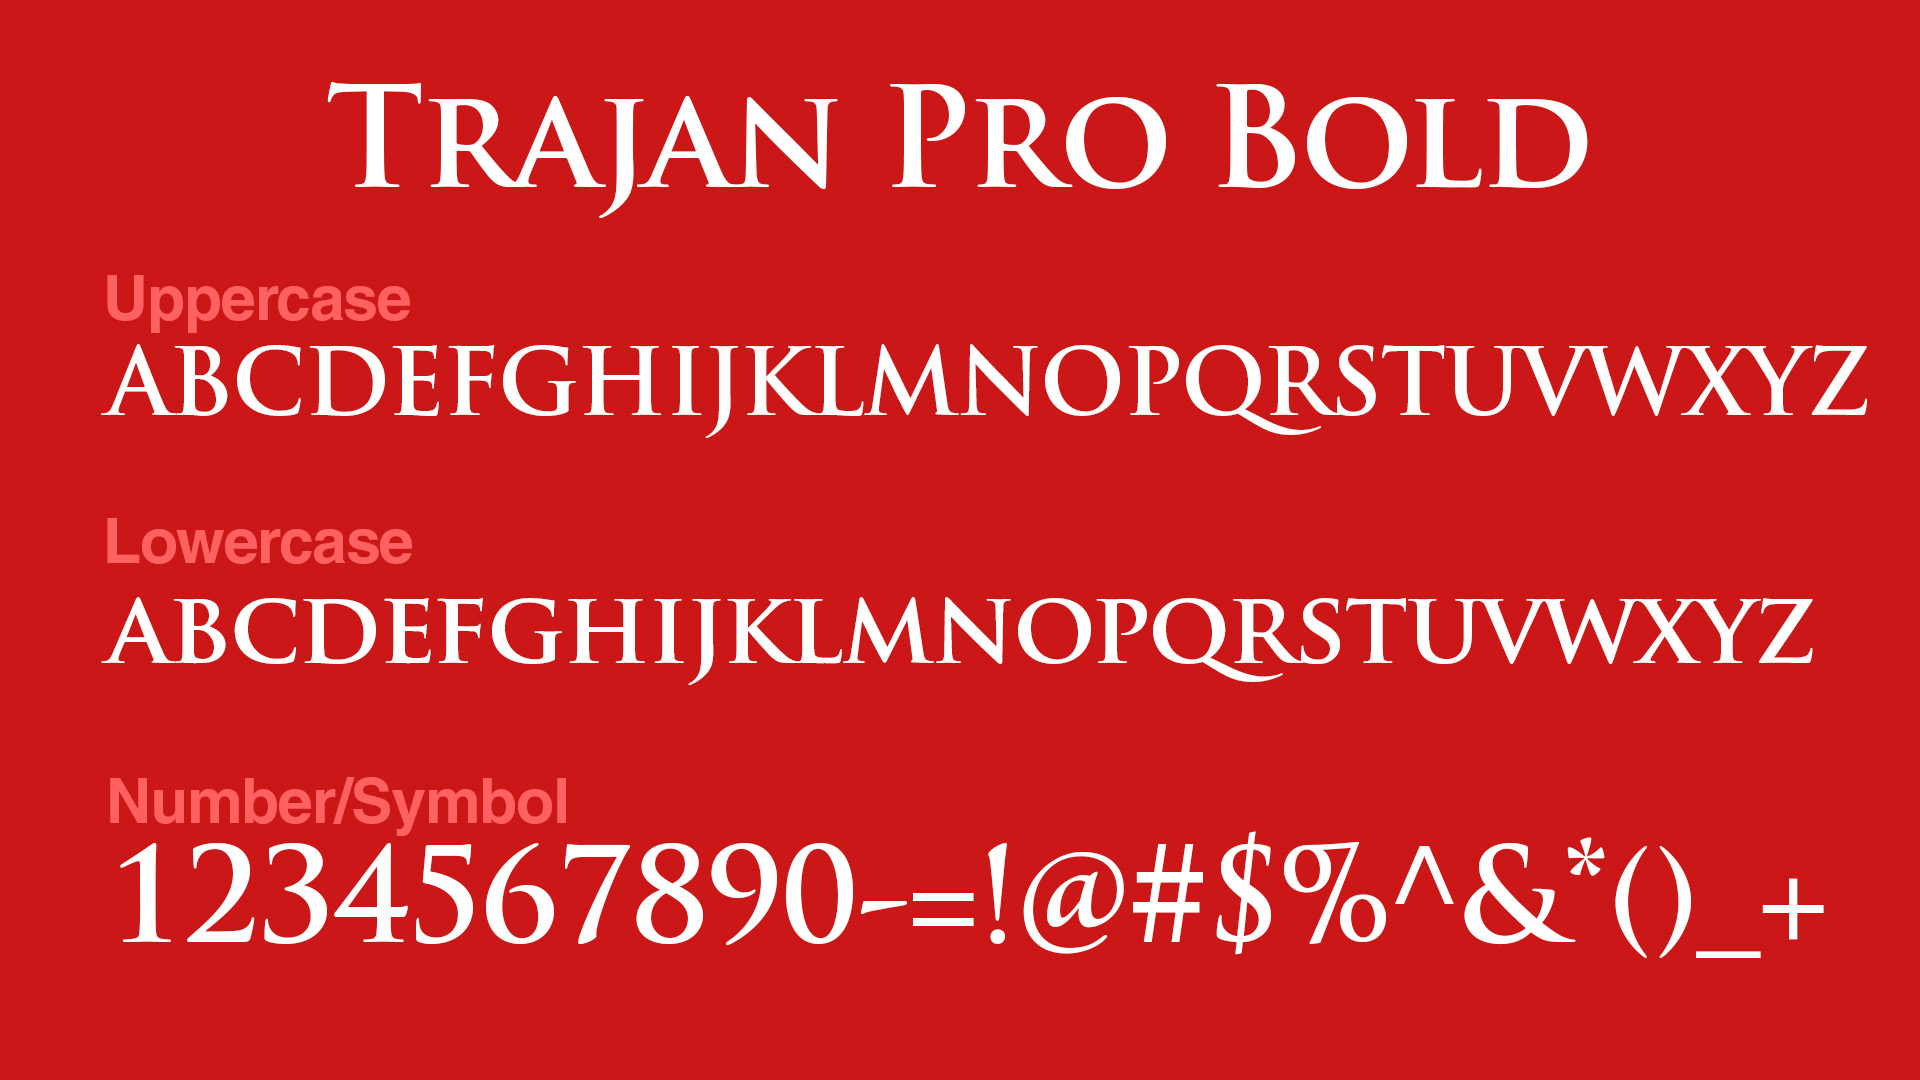 Complete Trajan Pro Bold font family in white on a dark red background.